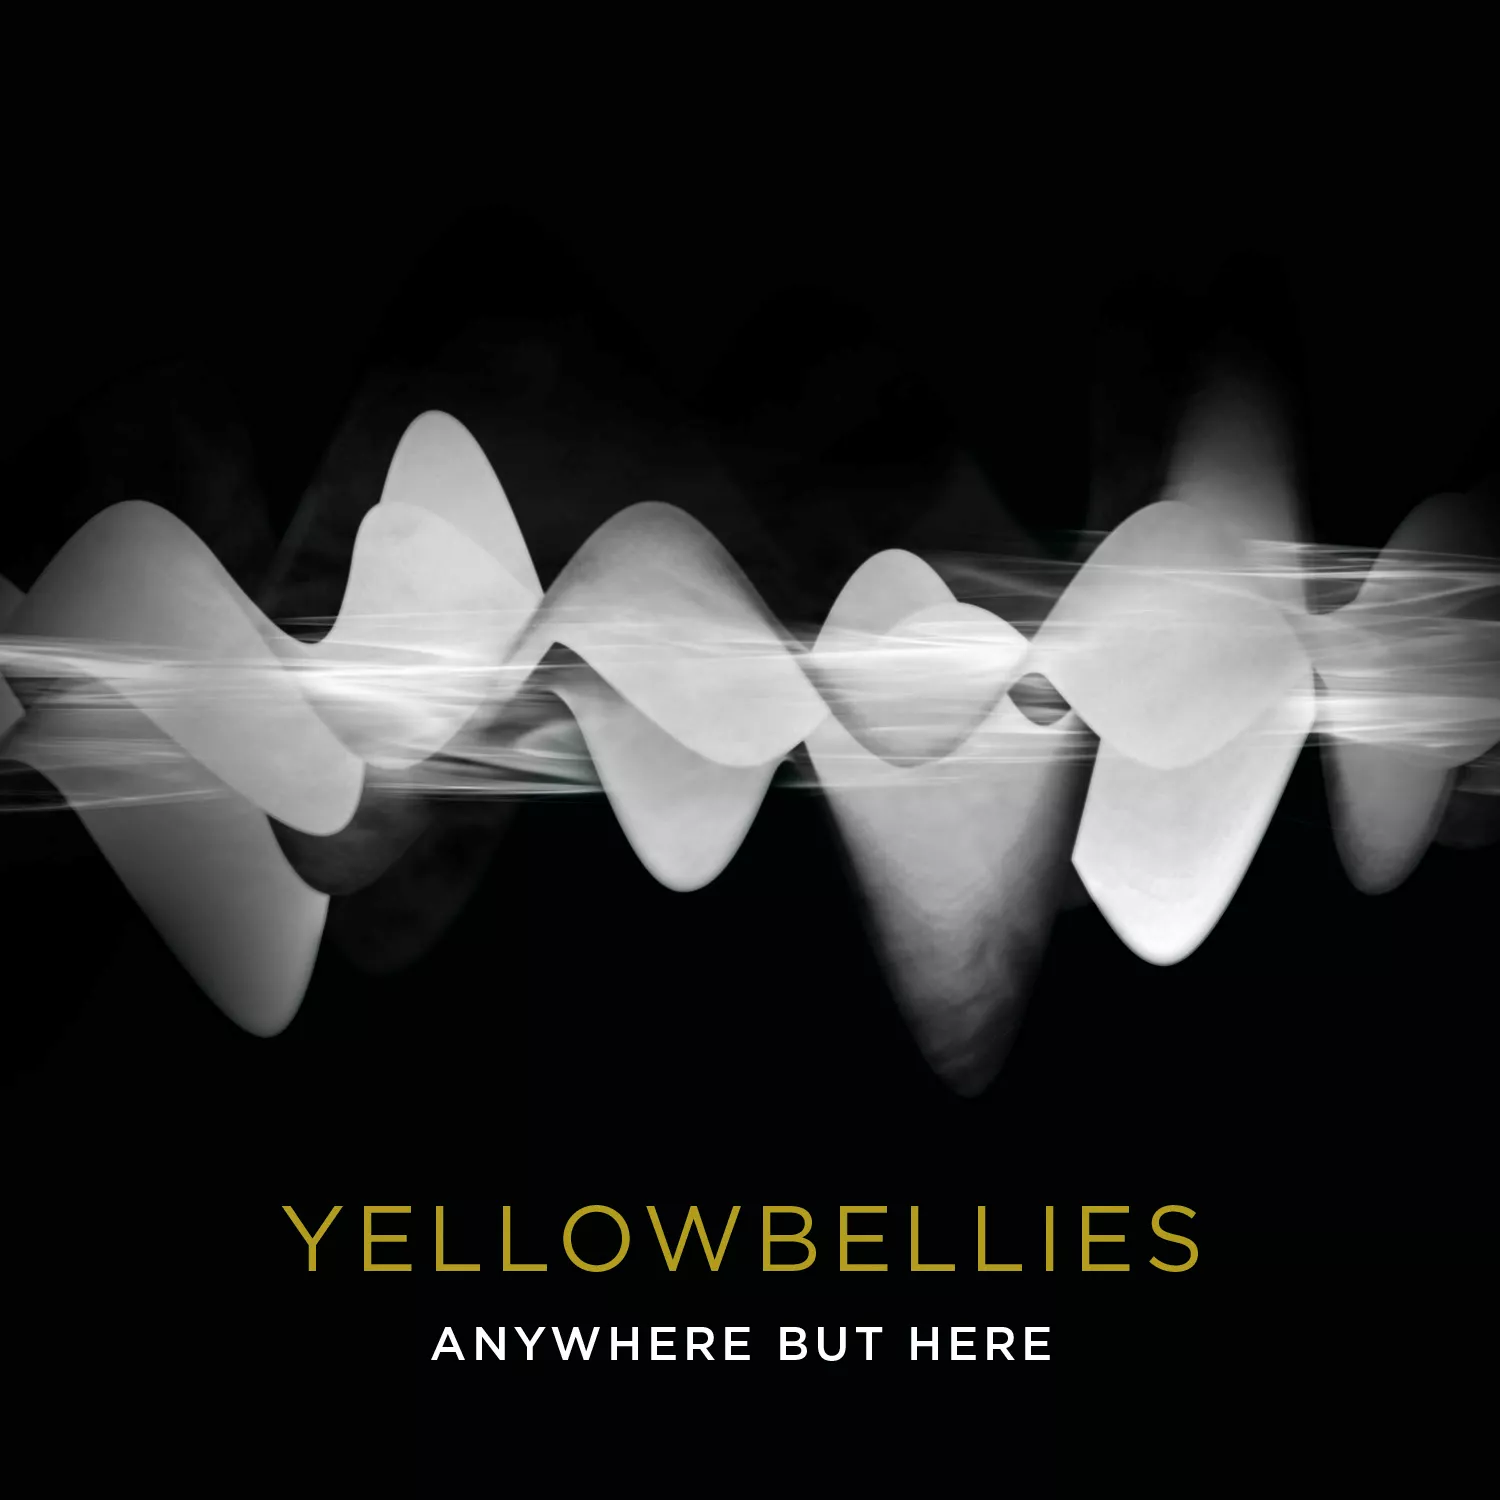 Anywhere But Here - Yellowbellies